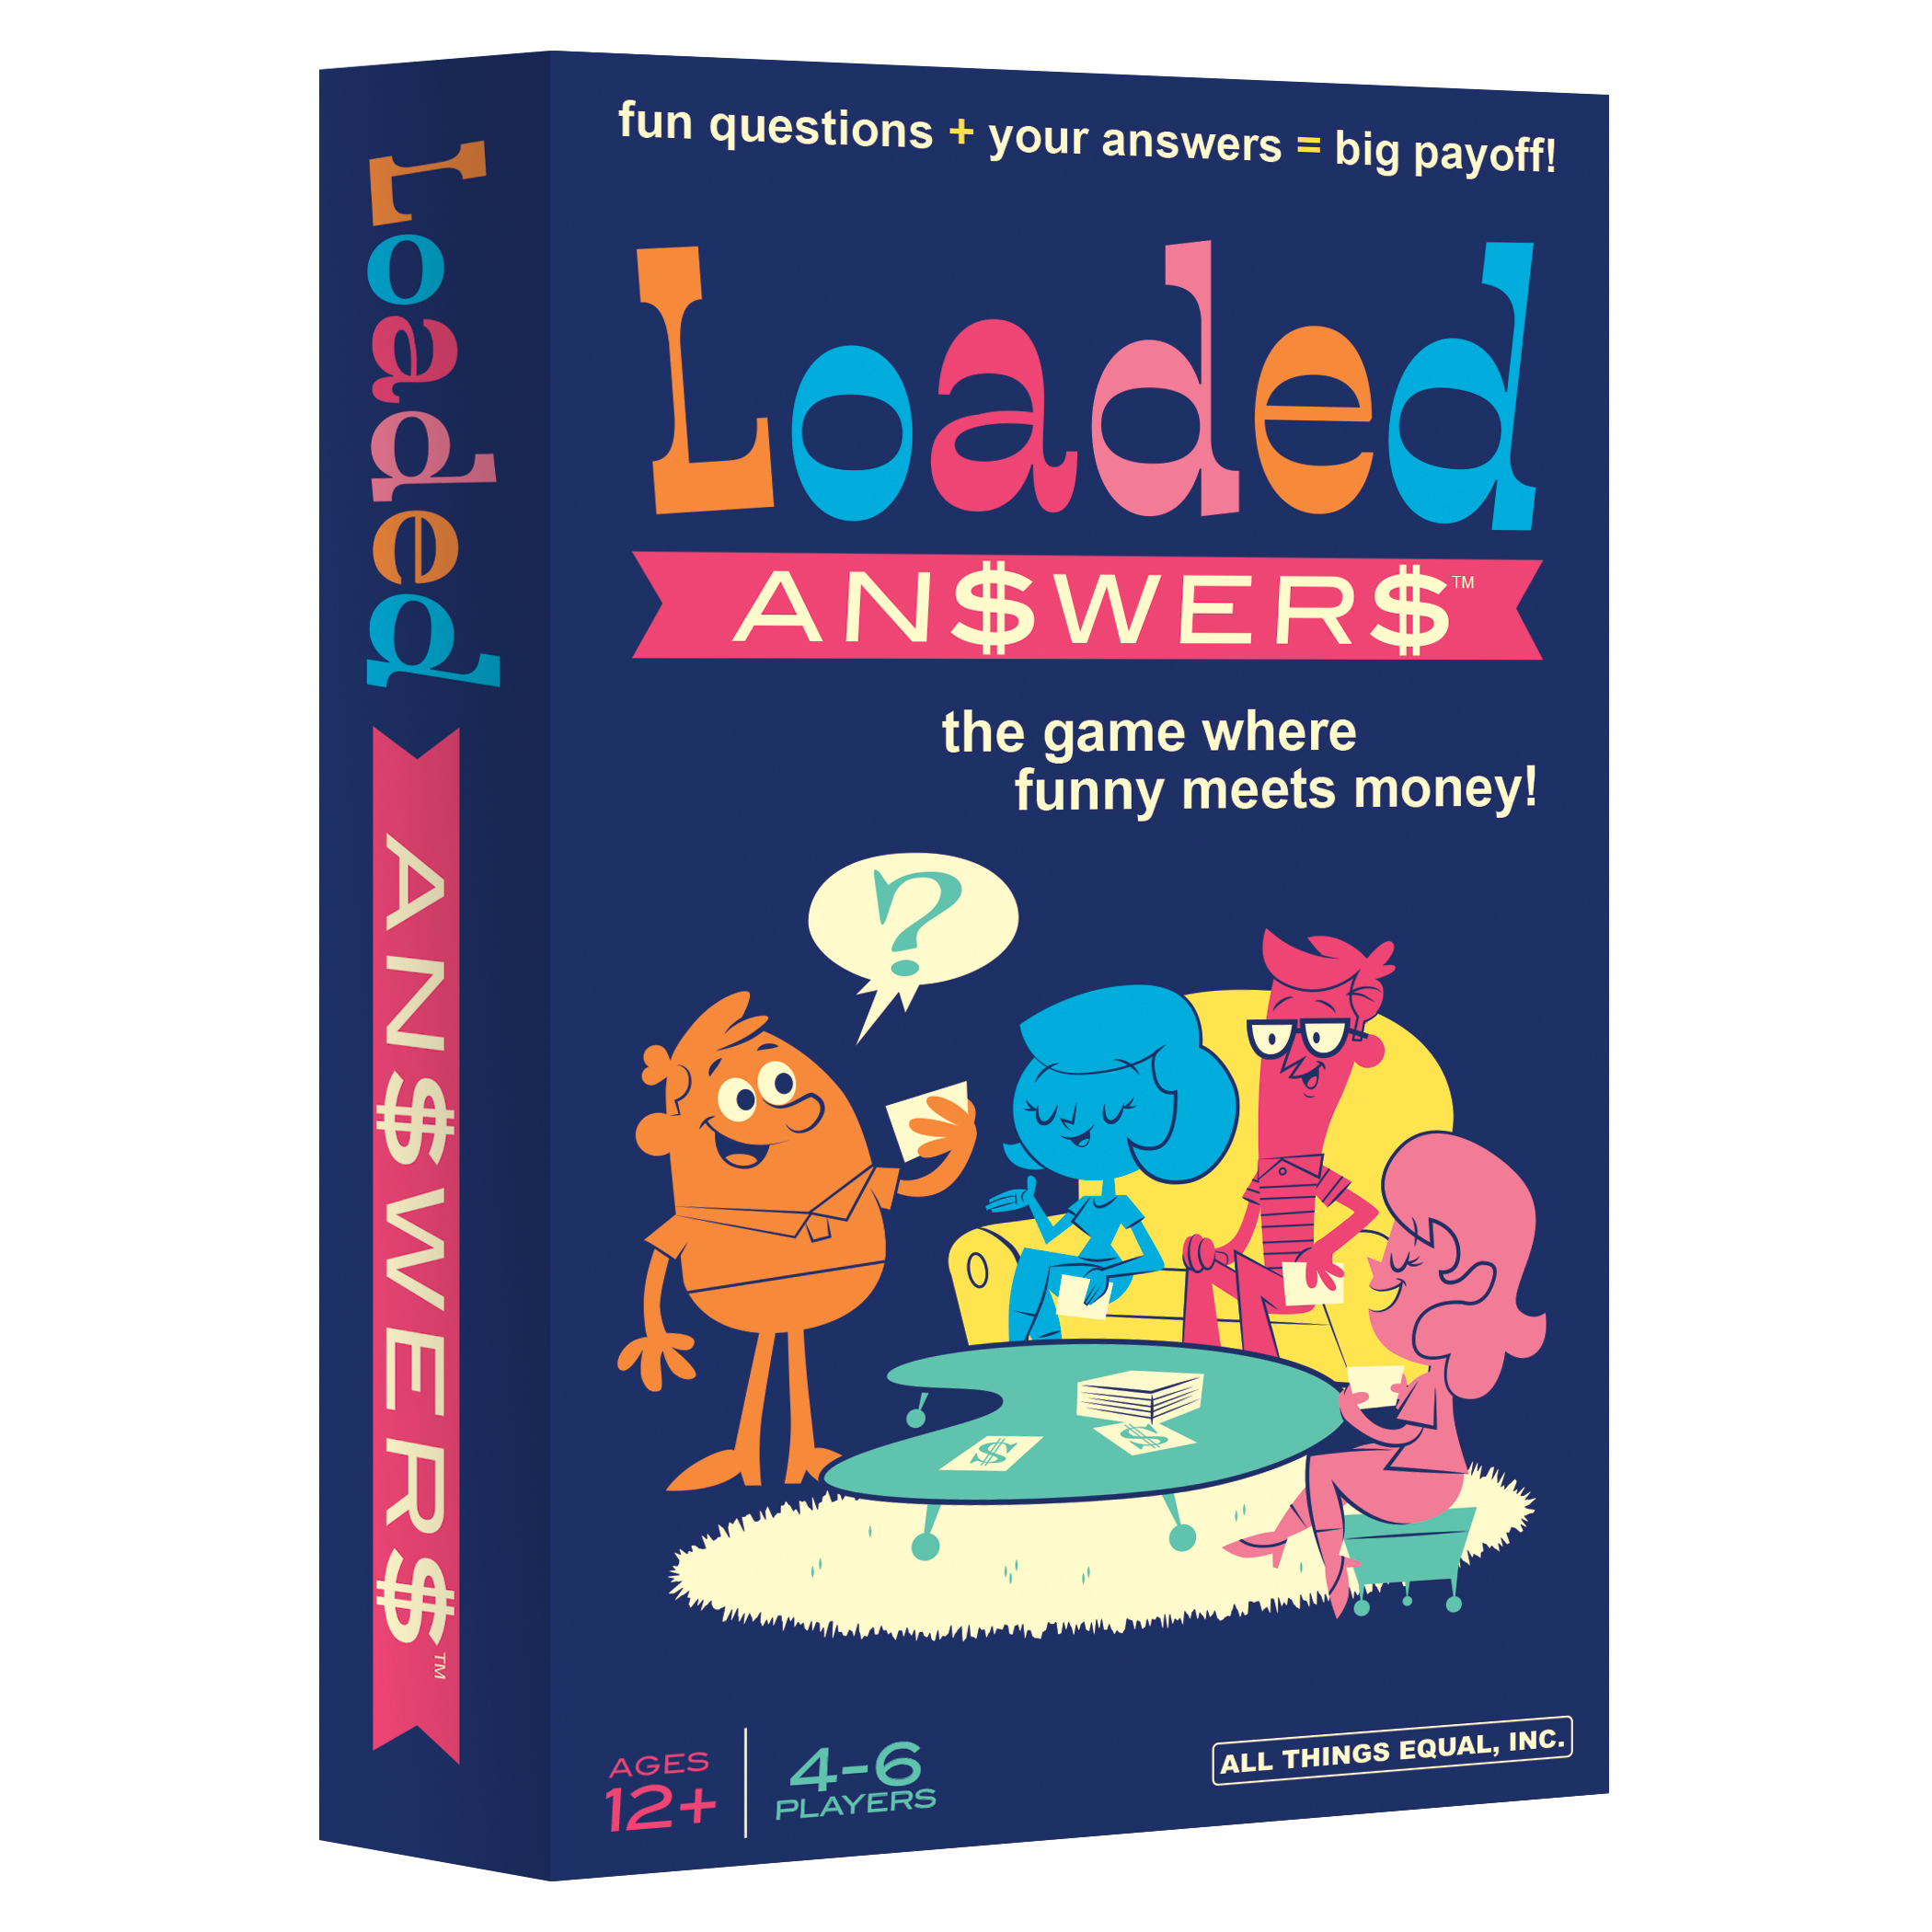 Loaded Answers - The Exciting Twist On The Popular Loaded